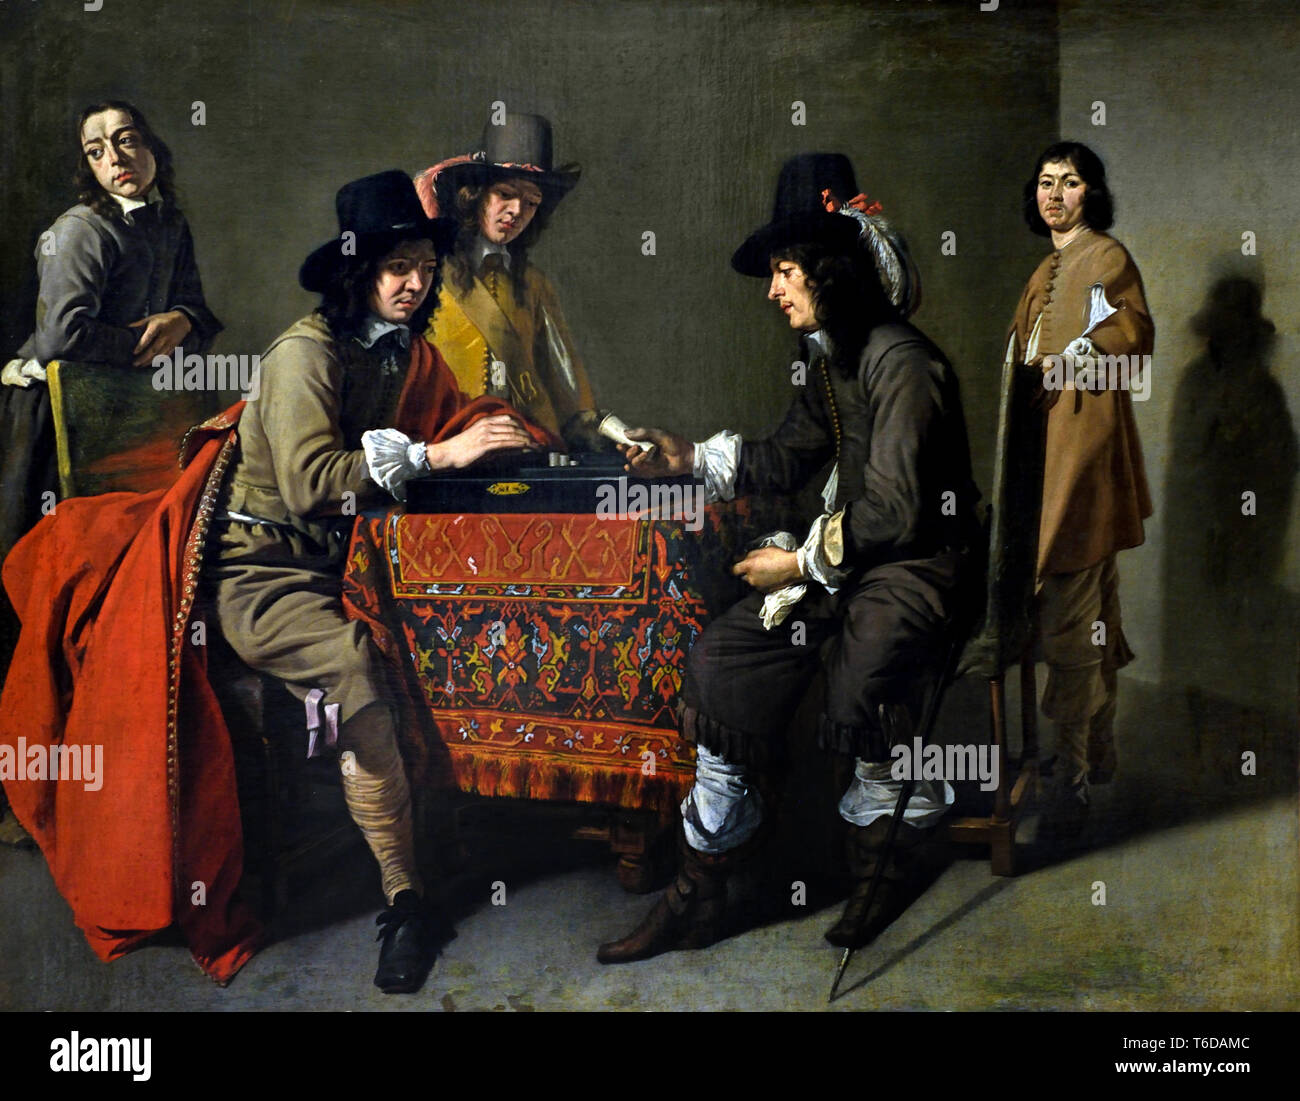 Trictrac players 1650 by MASTER of GAMES.  Painter working in Paris 17th century, in the entourage of Le Nain. French or Nordic painter working in Paris around 1650. Stock Photo